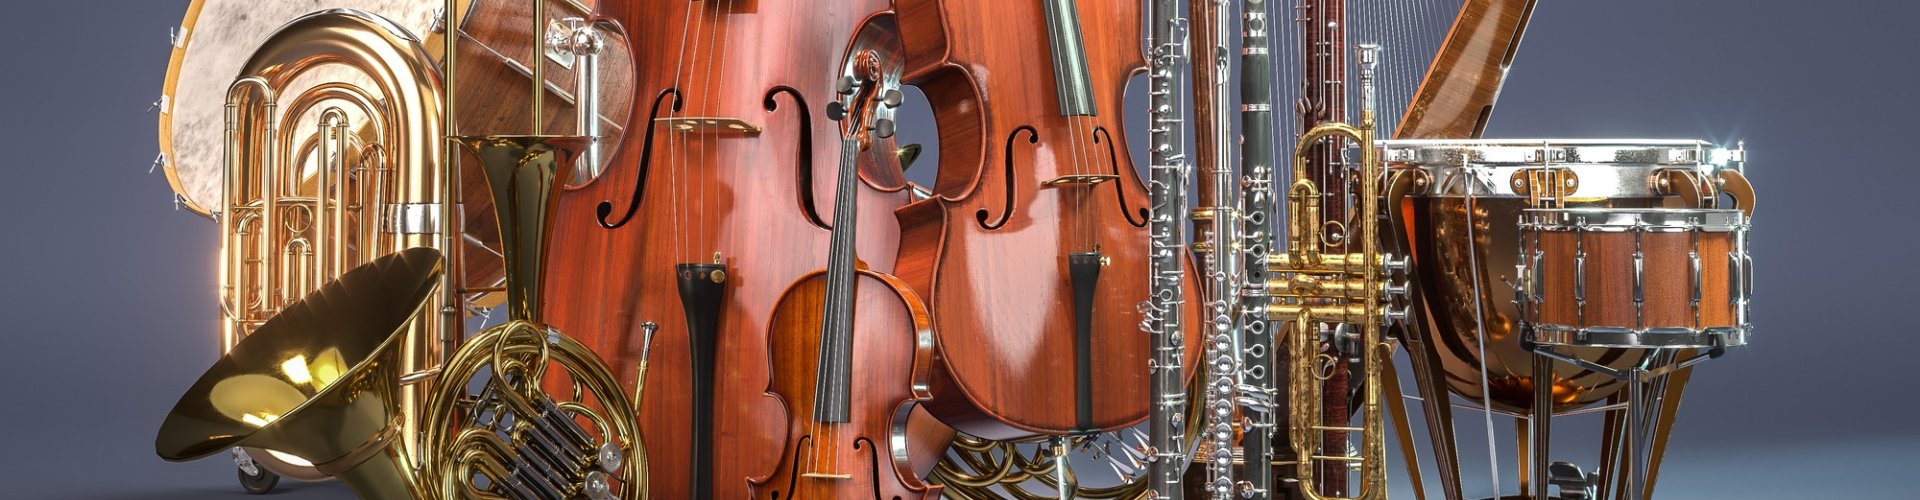 Looking for affordable Instrument Hire? We can help!